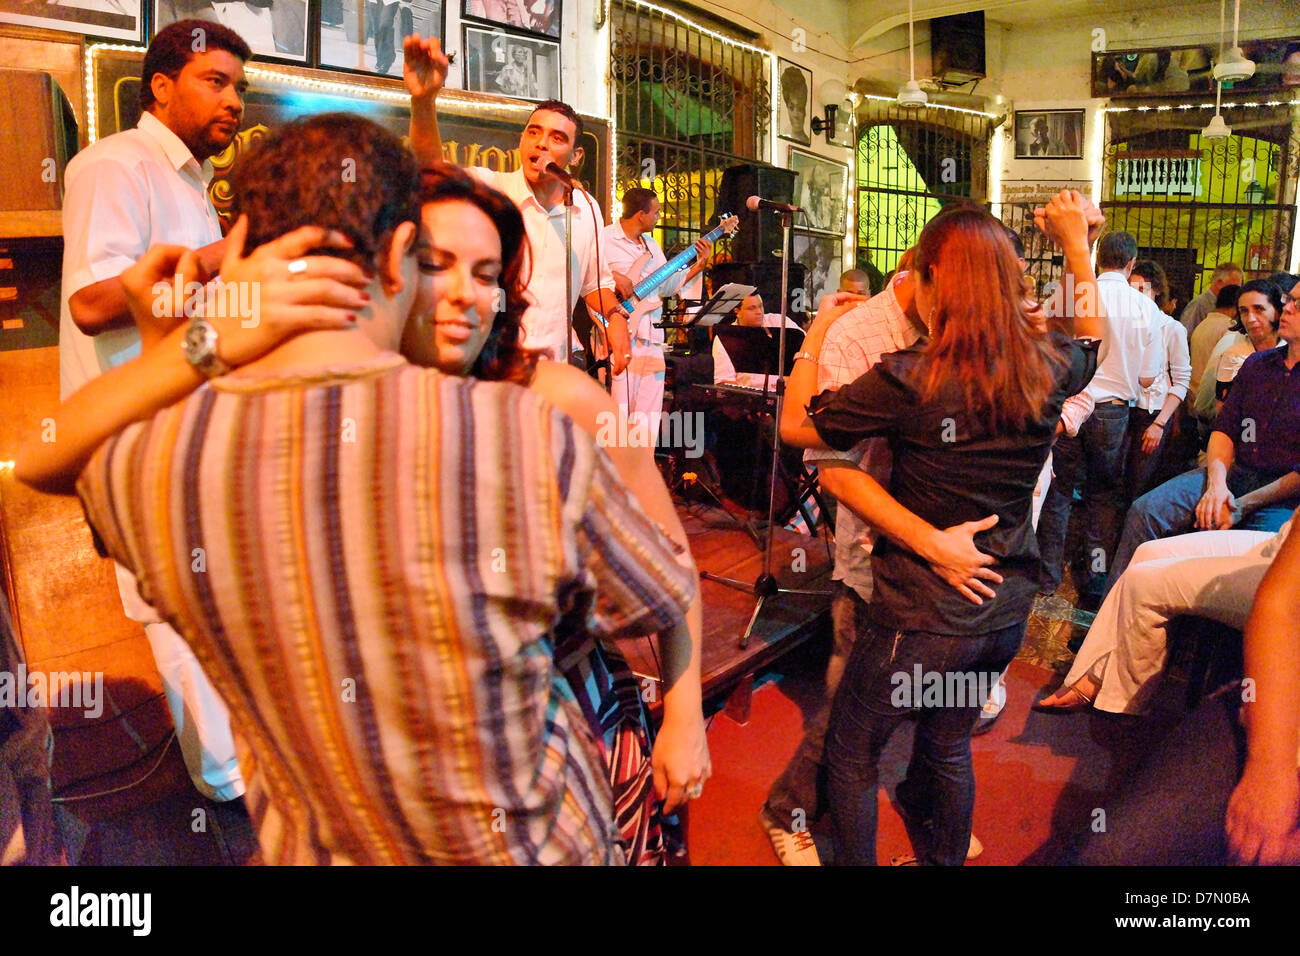 Cafe Havana, a salsa bar in Cartagena, Saturday night with band and customers dancing Stock Photo - Alamy